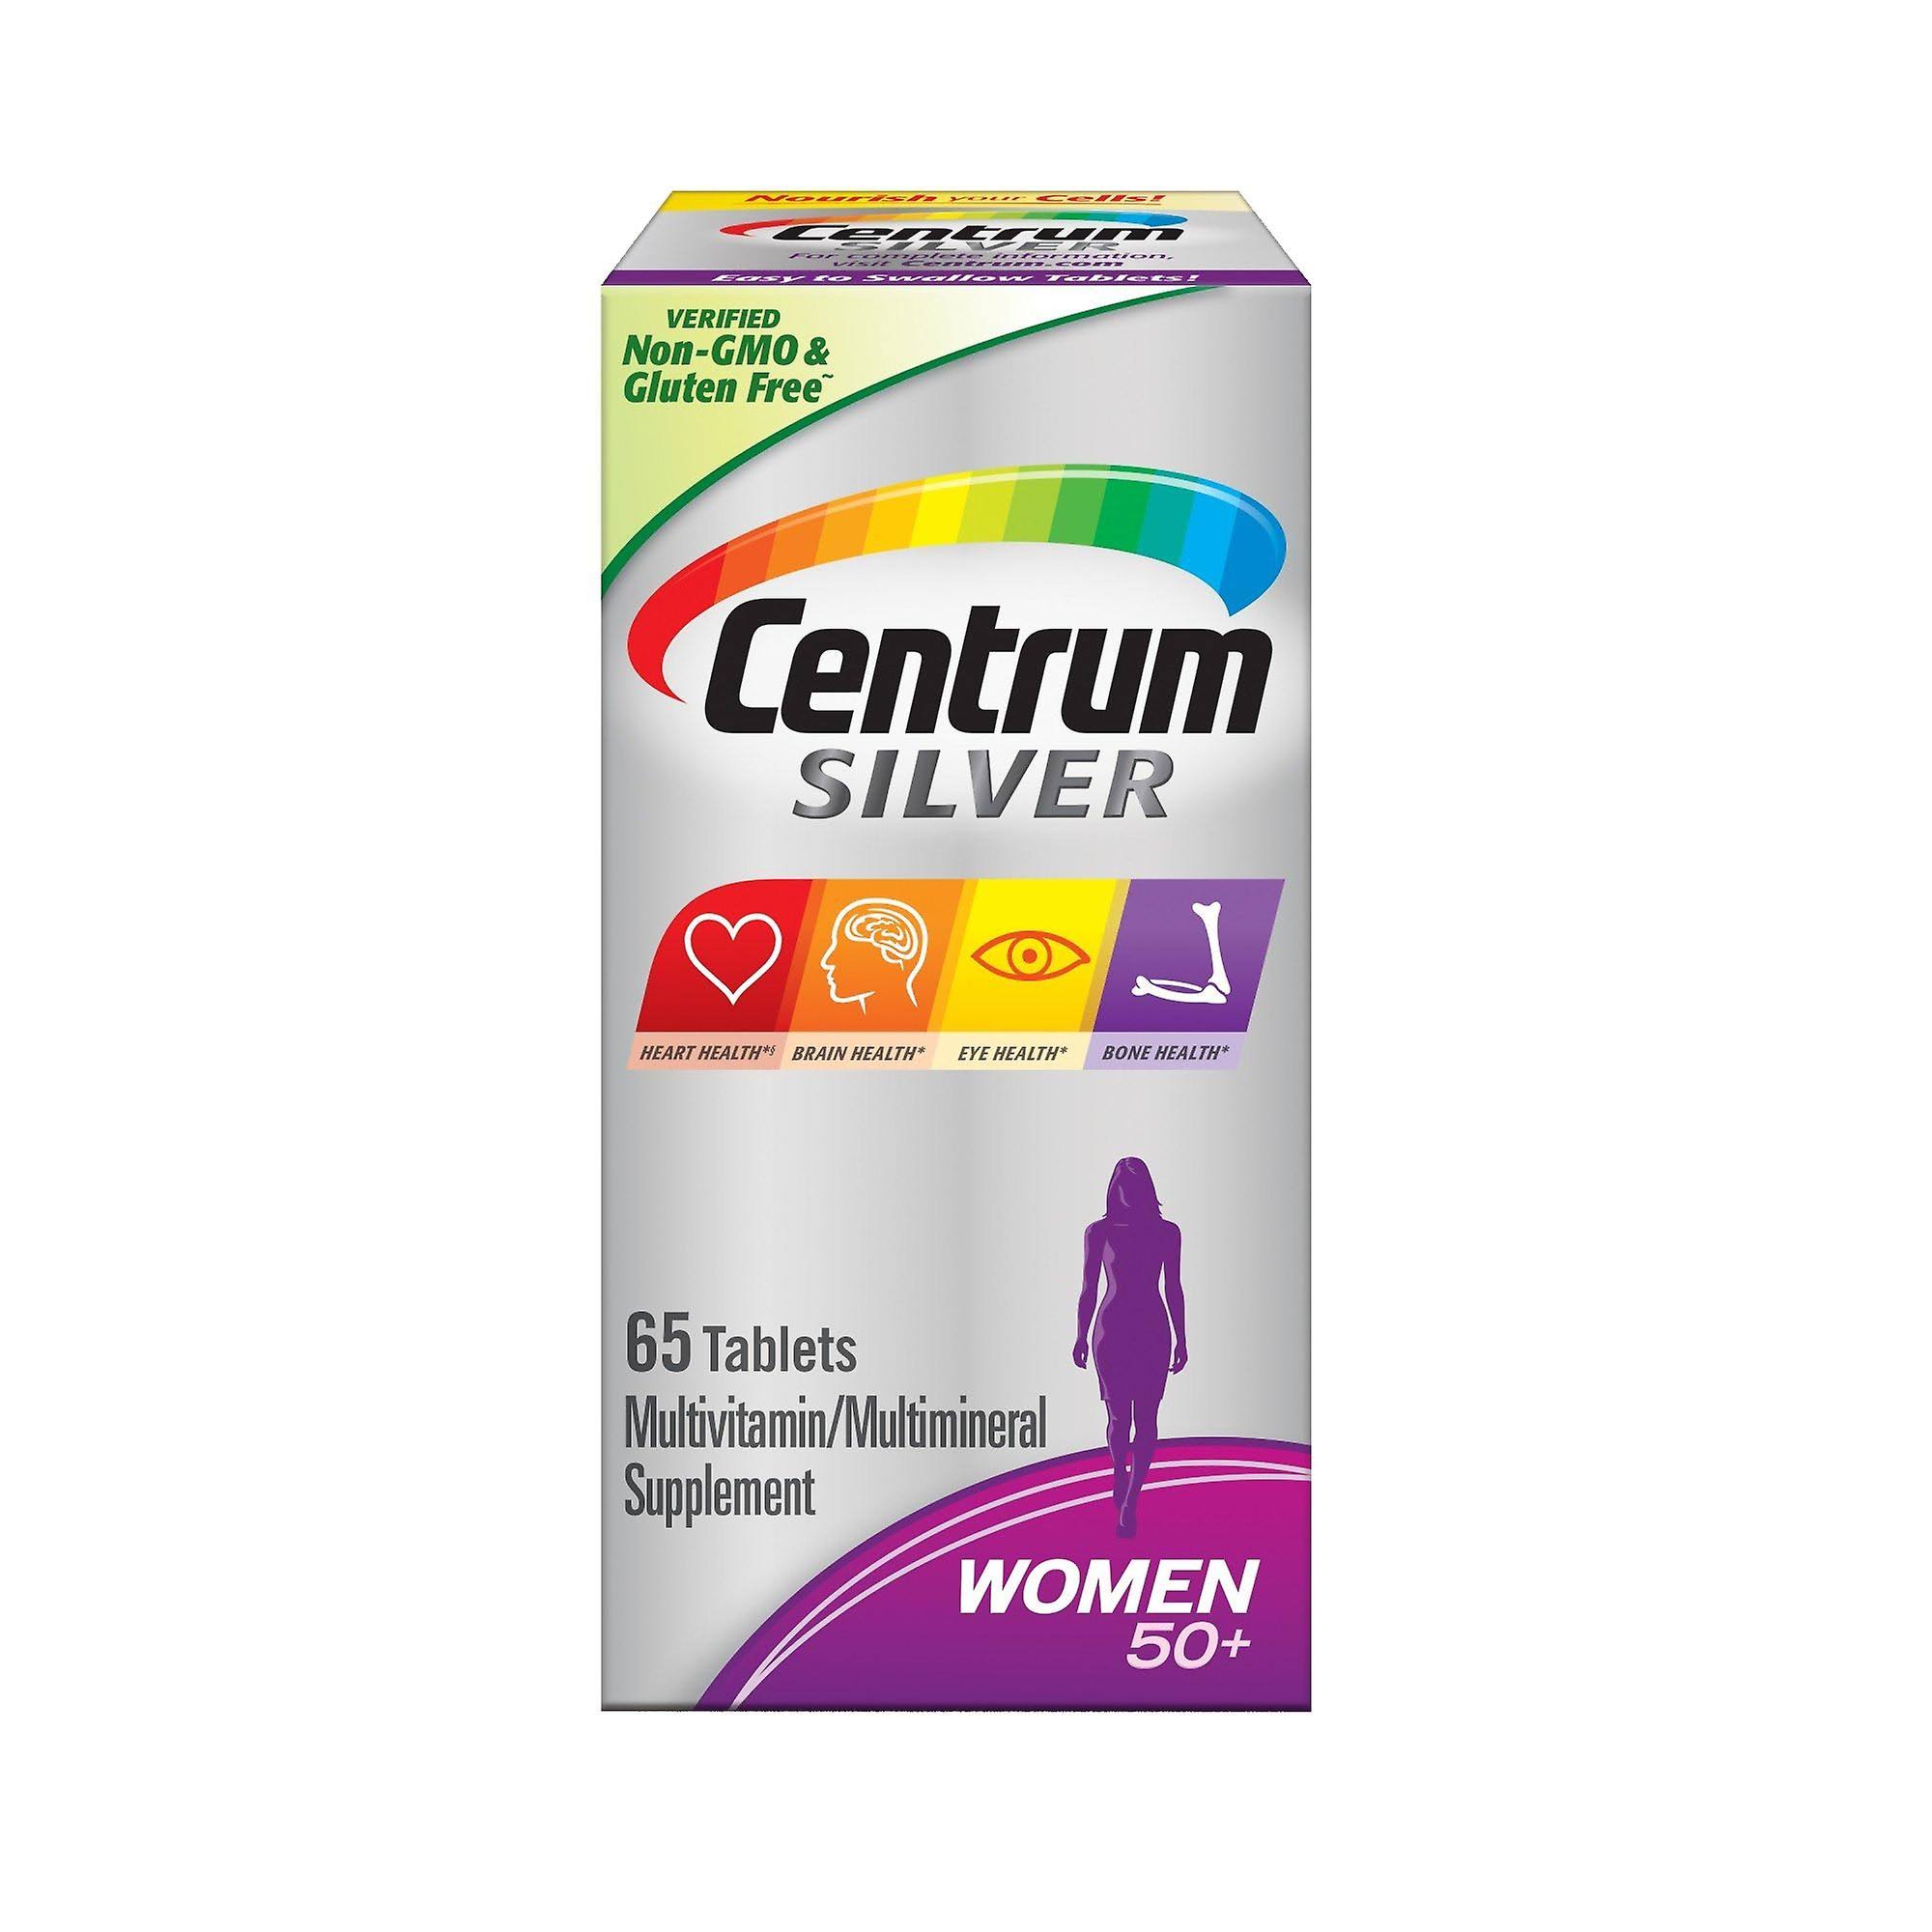 Centrum Silver Multivitamins for Women Over 50, Multivitamin/Multimineral Supplement with Vitamin D3, B Vitamins, Calcium and Antioxidants - 65 Count